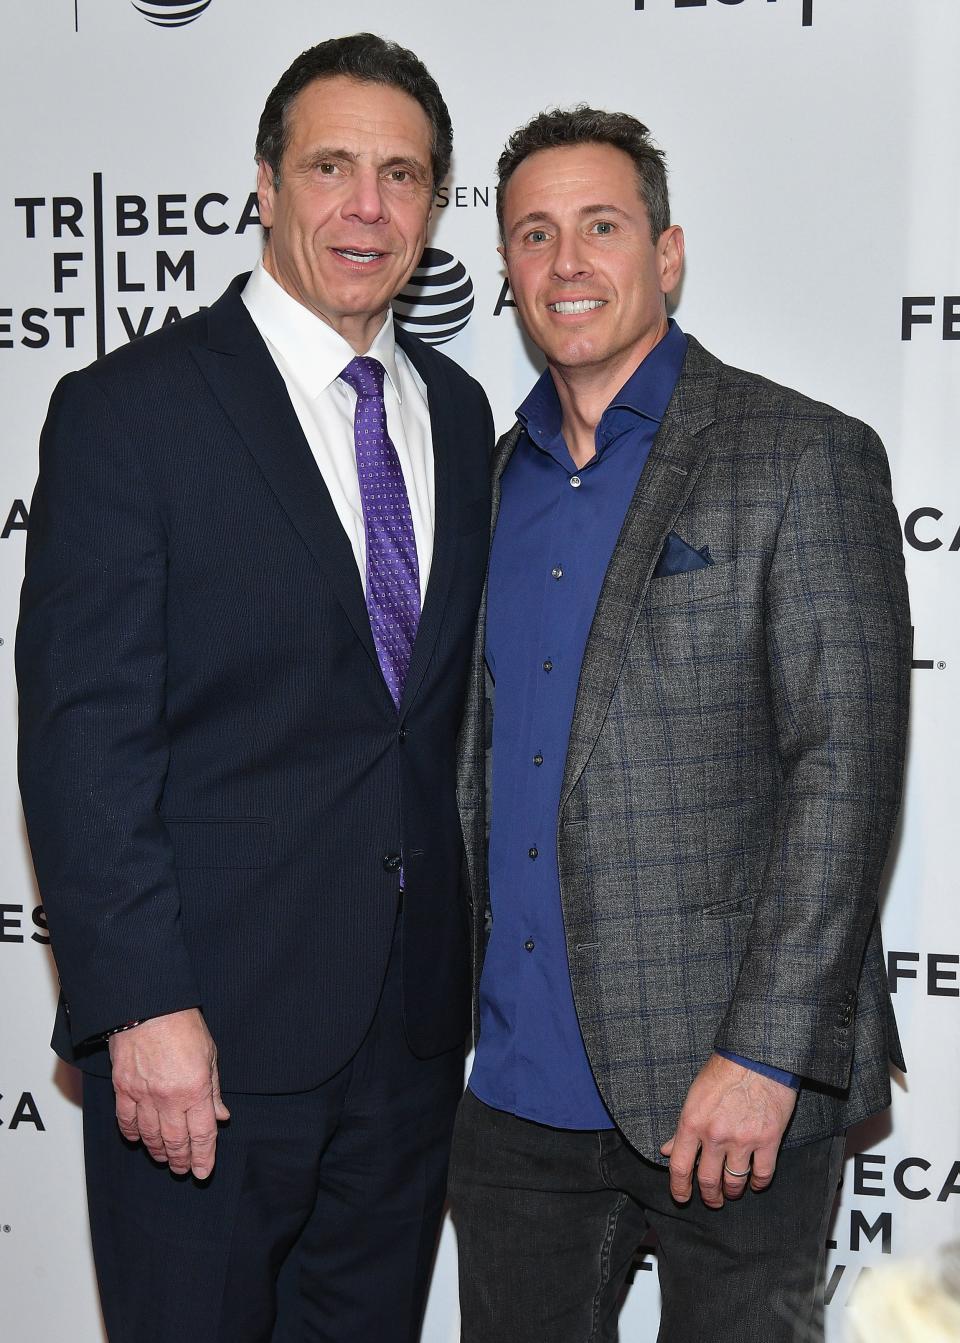 Brothers Andrew and Chris Cuomo photographed at the 2018 Tribeca Film Festival in New York City.